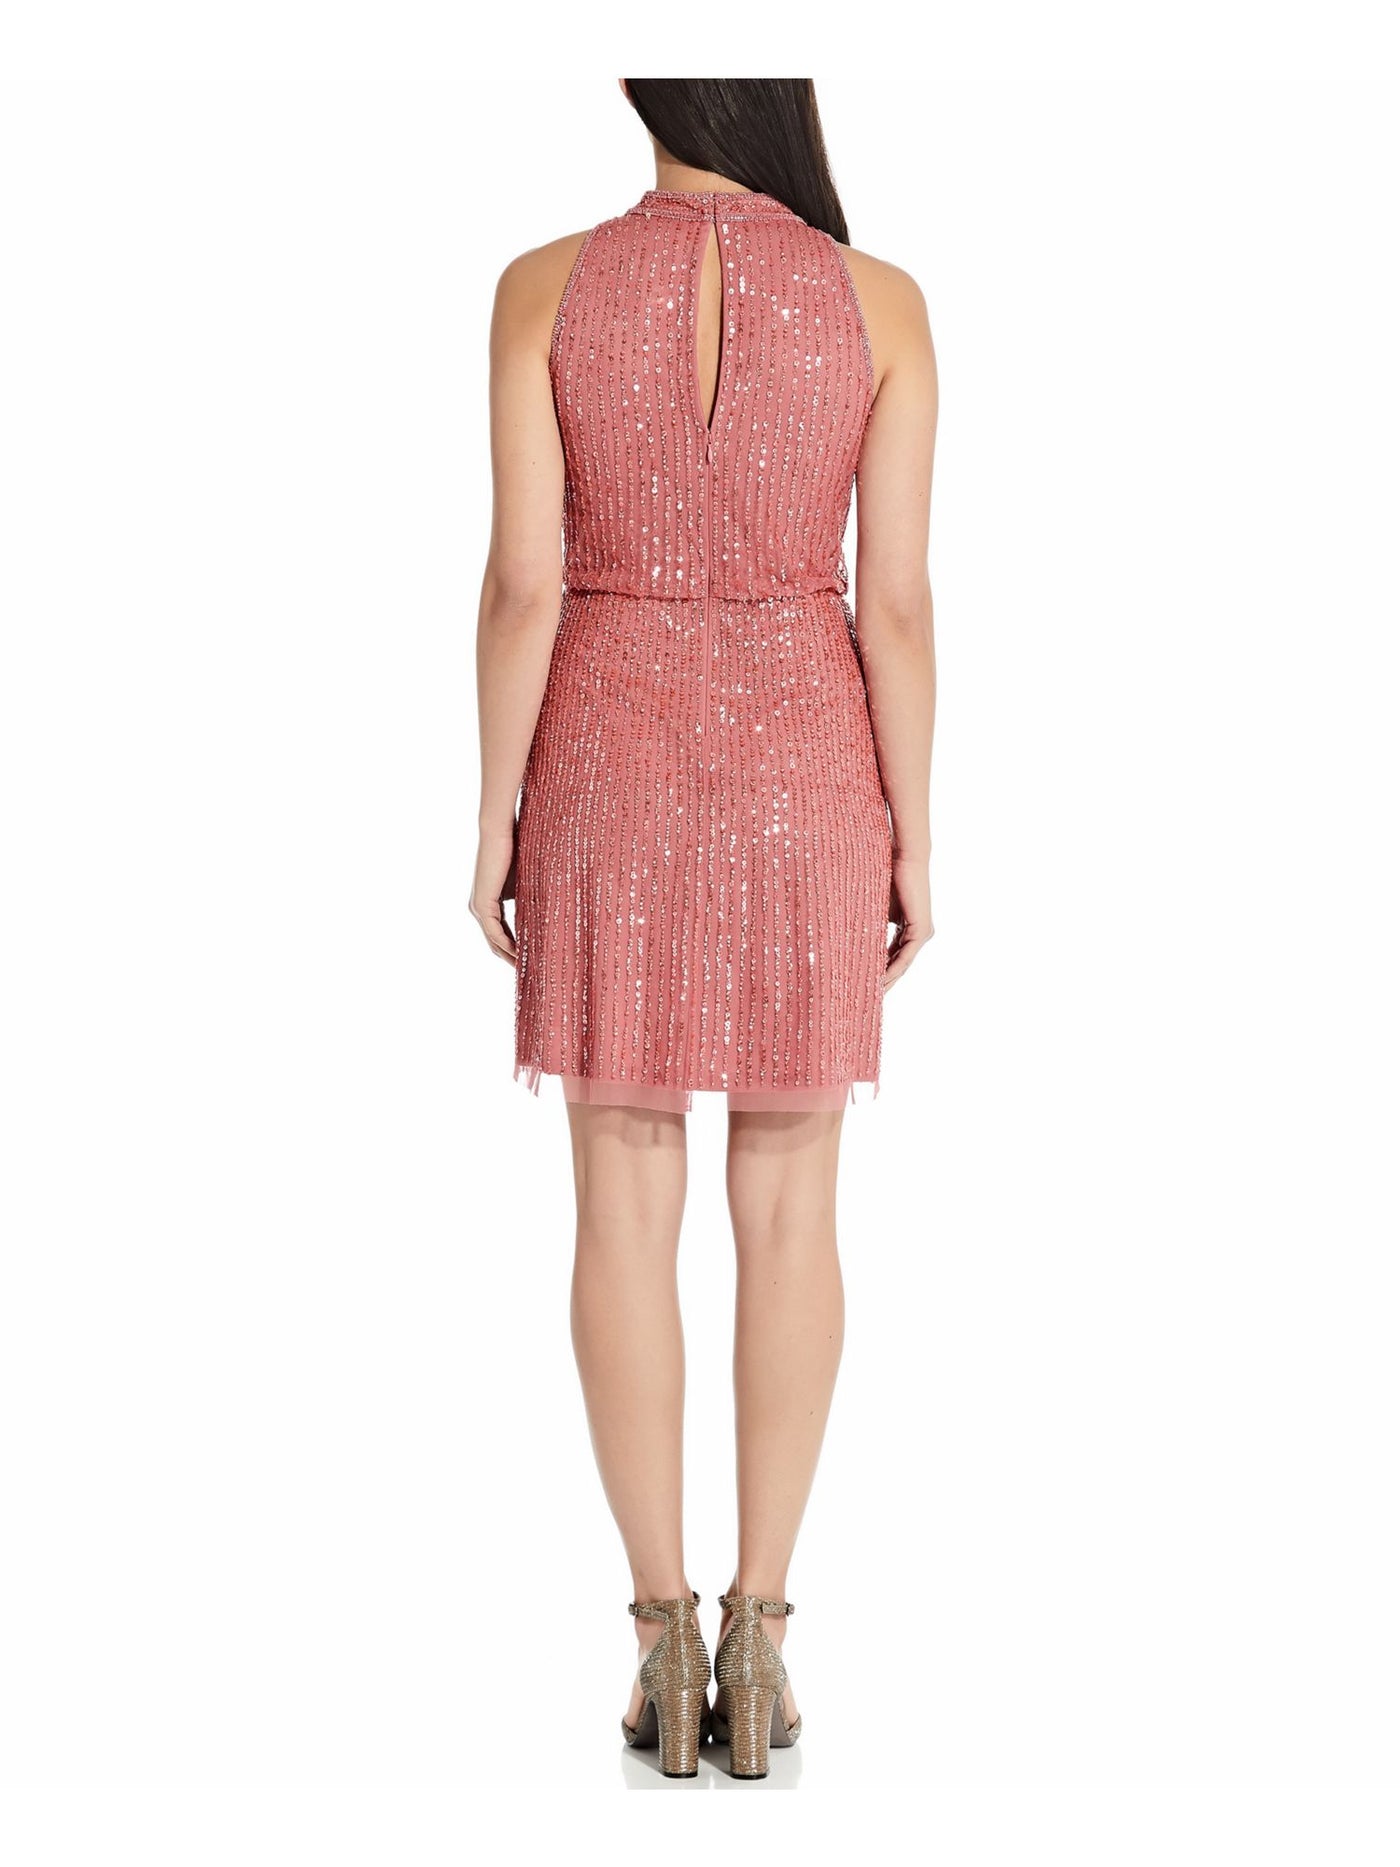 ADRIANNA PAPELL Womens Coral Embellished Beaded Zippered, Sheer Pinstripe Sleeveless Mock Neck Short Party Blouson Dress 0